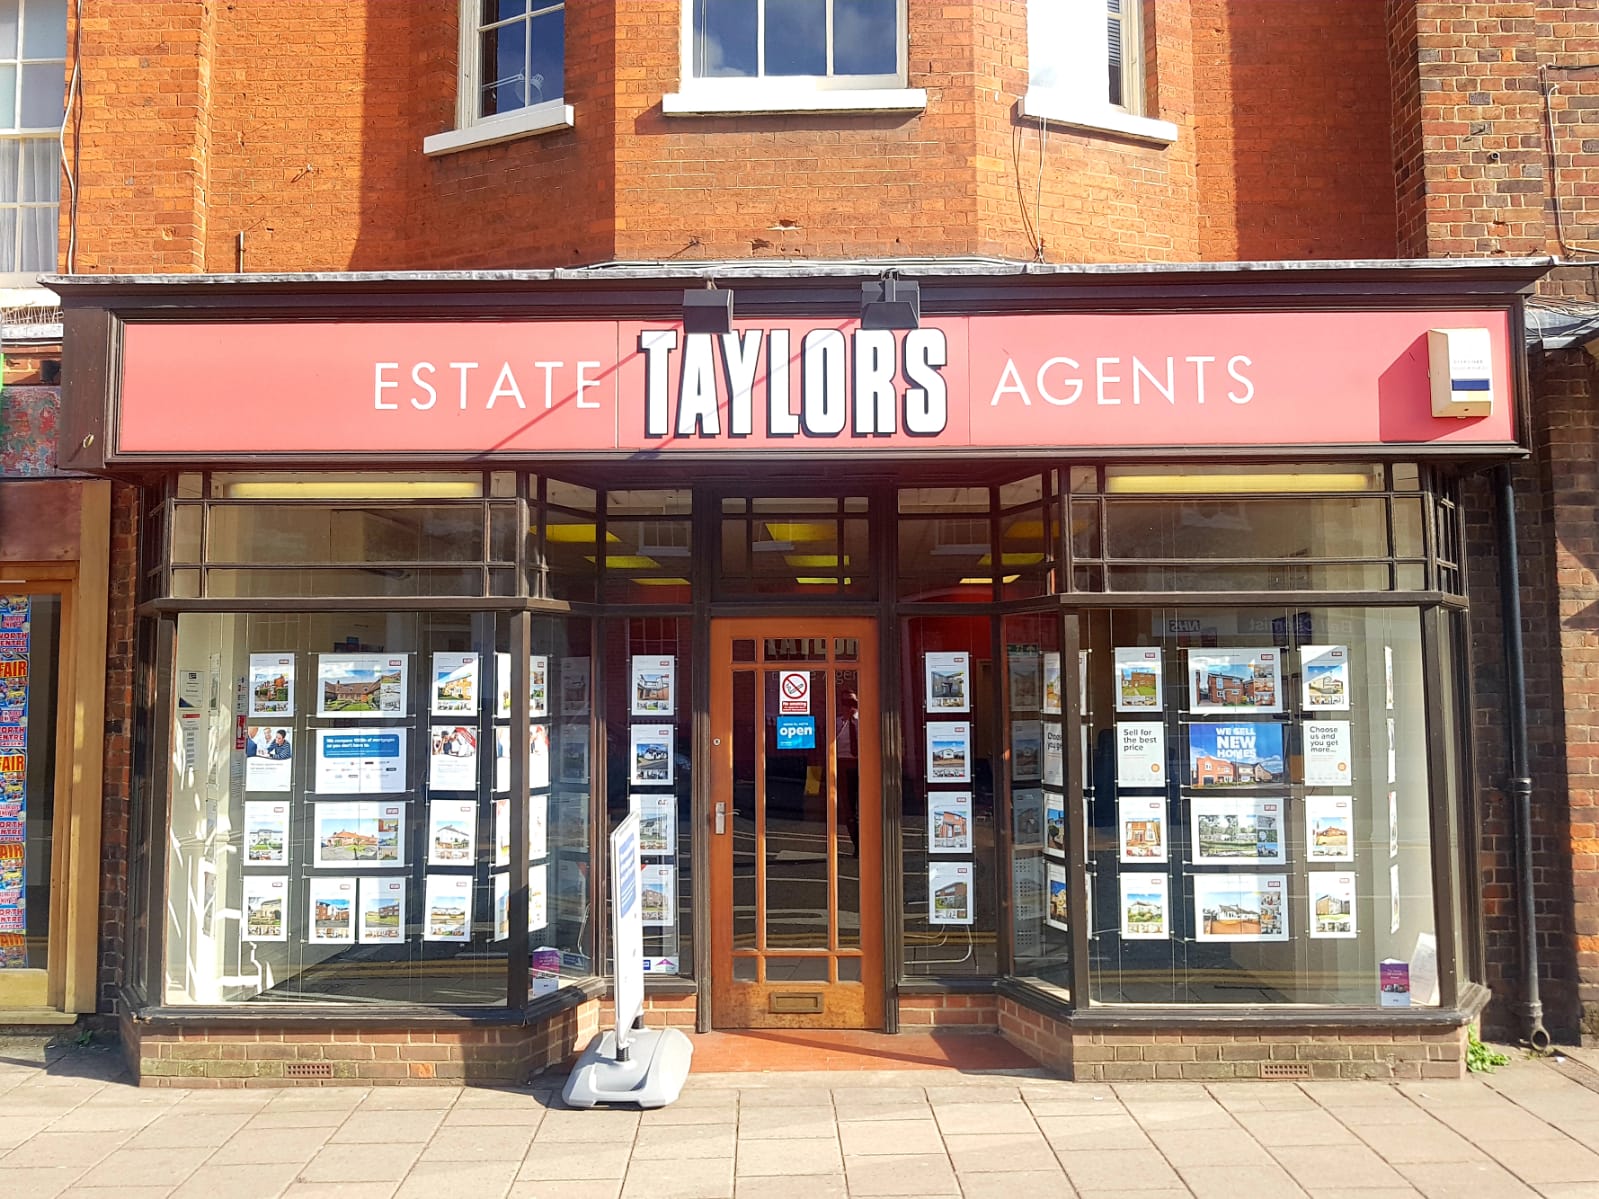 Taylors Sales and Letting Agents Hitchin Hitchin 01462 290032